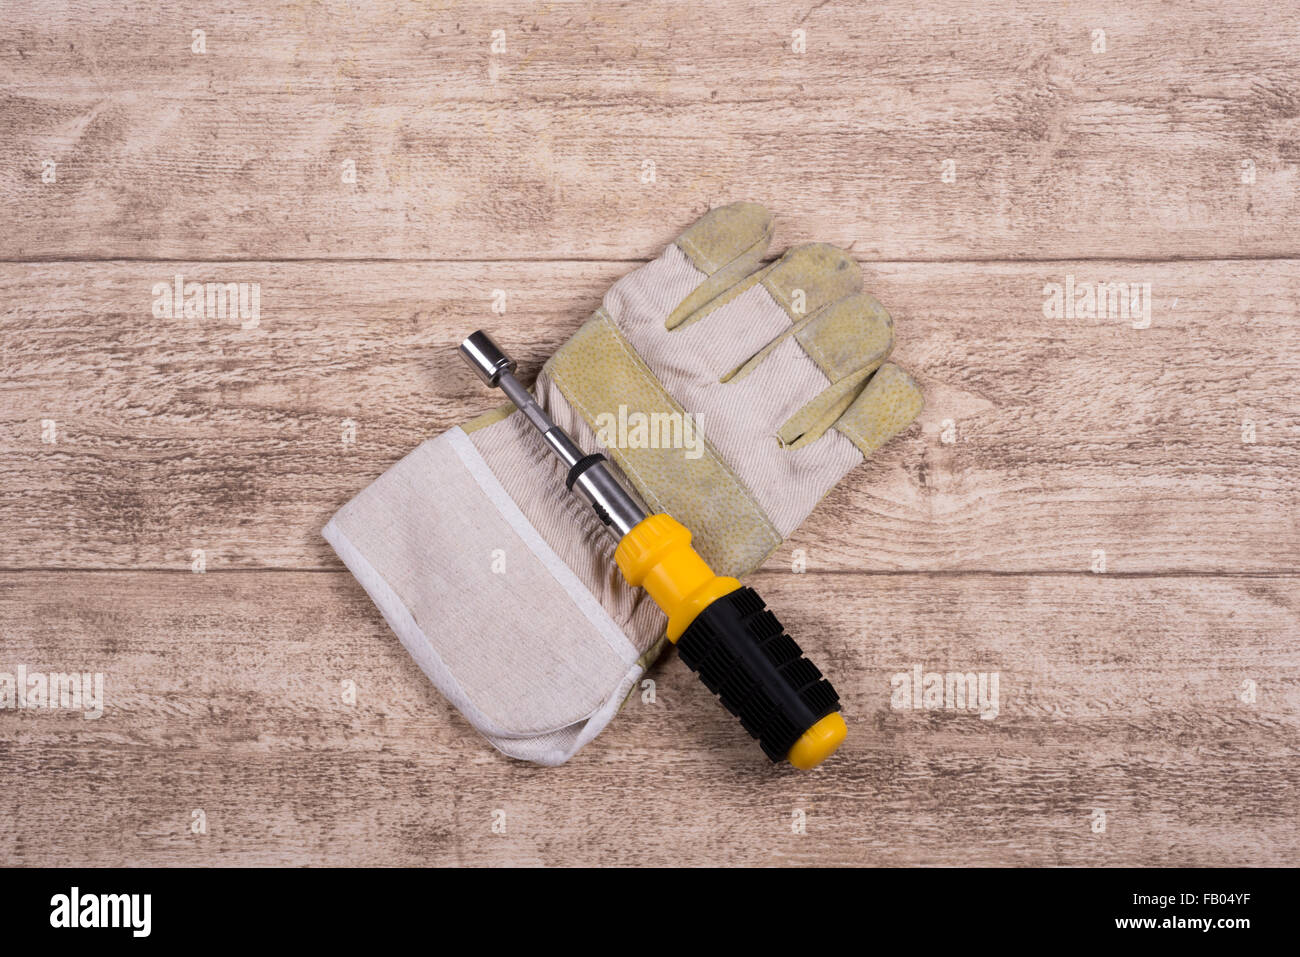 steel tool and working glove on a wooden table Stock Photo